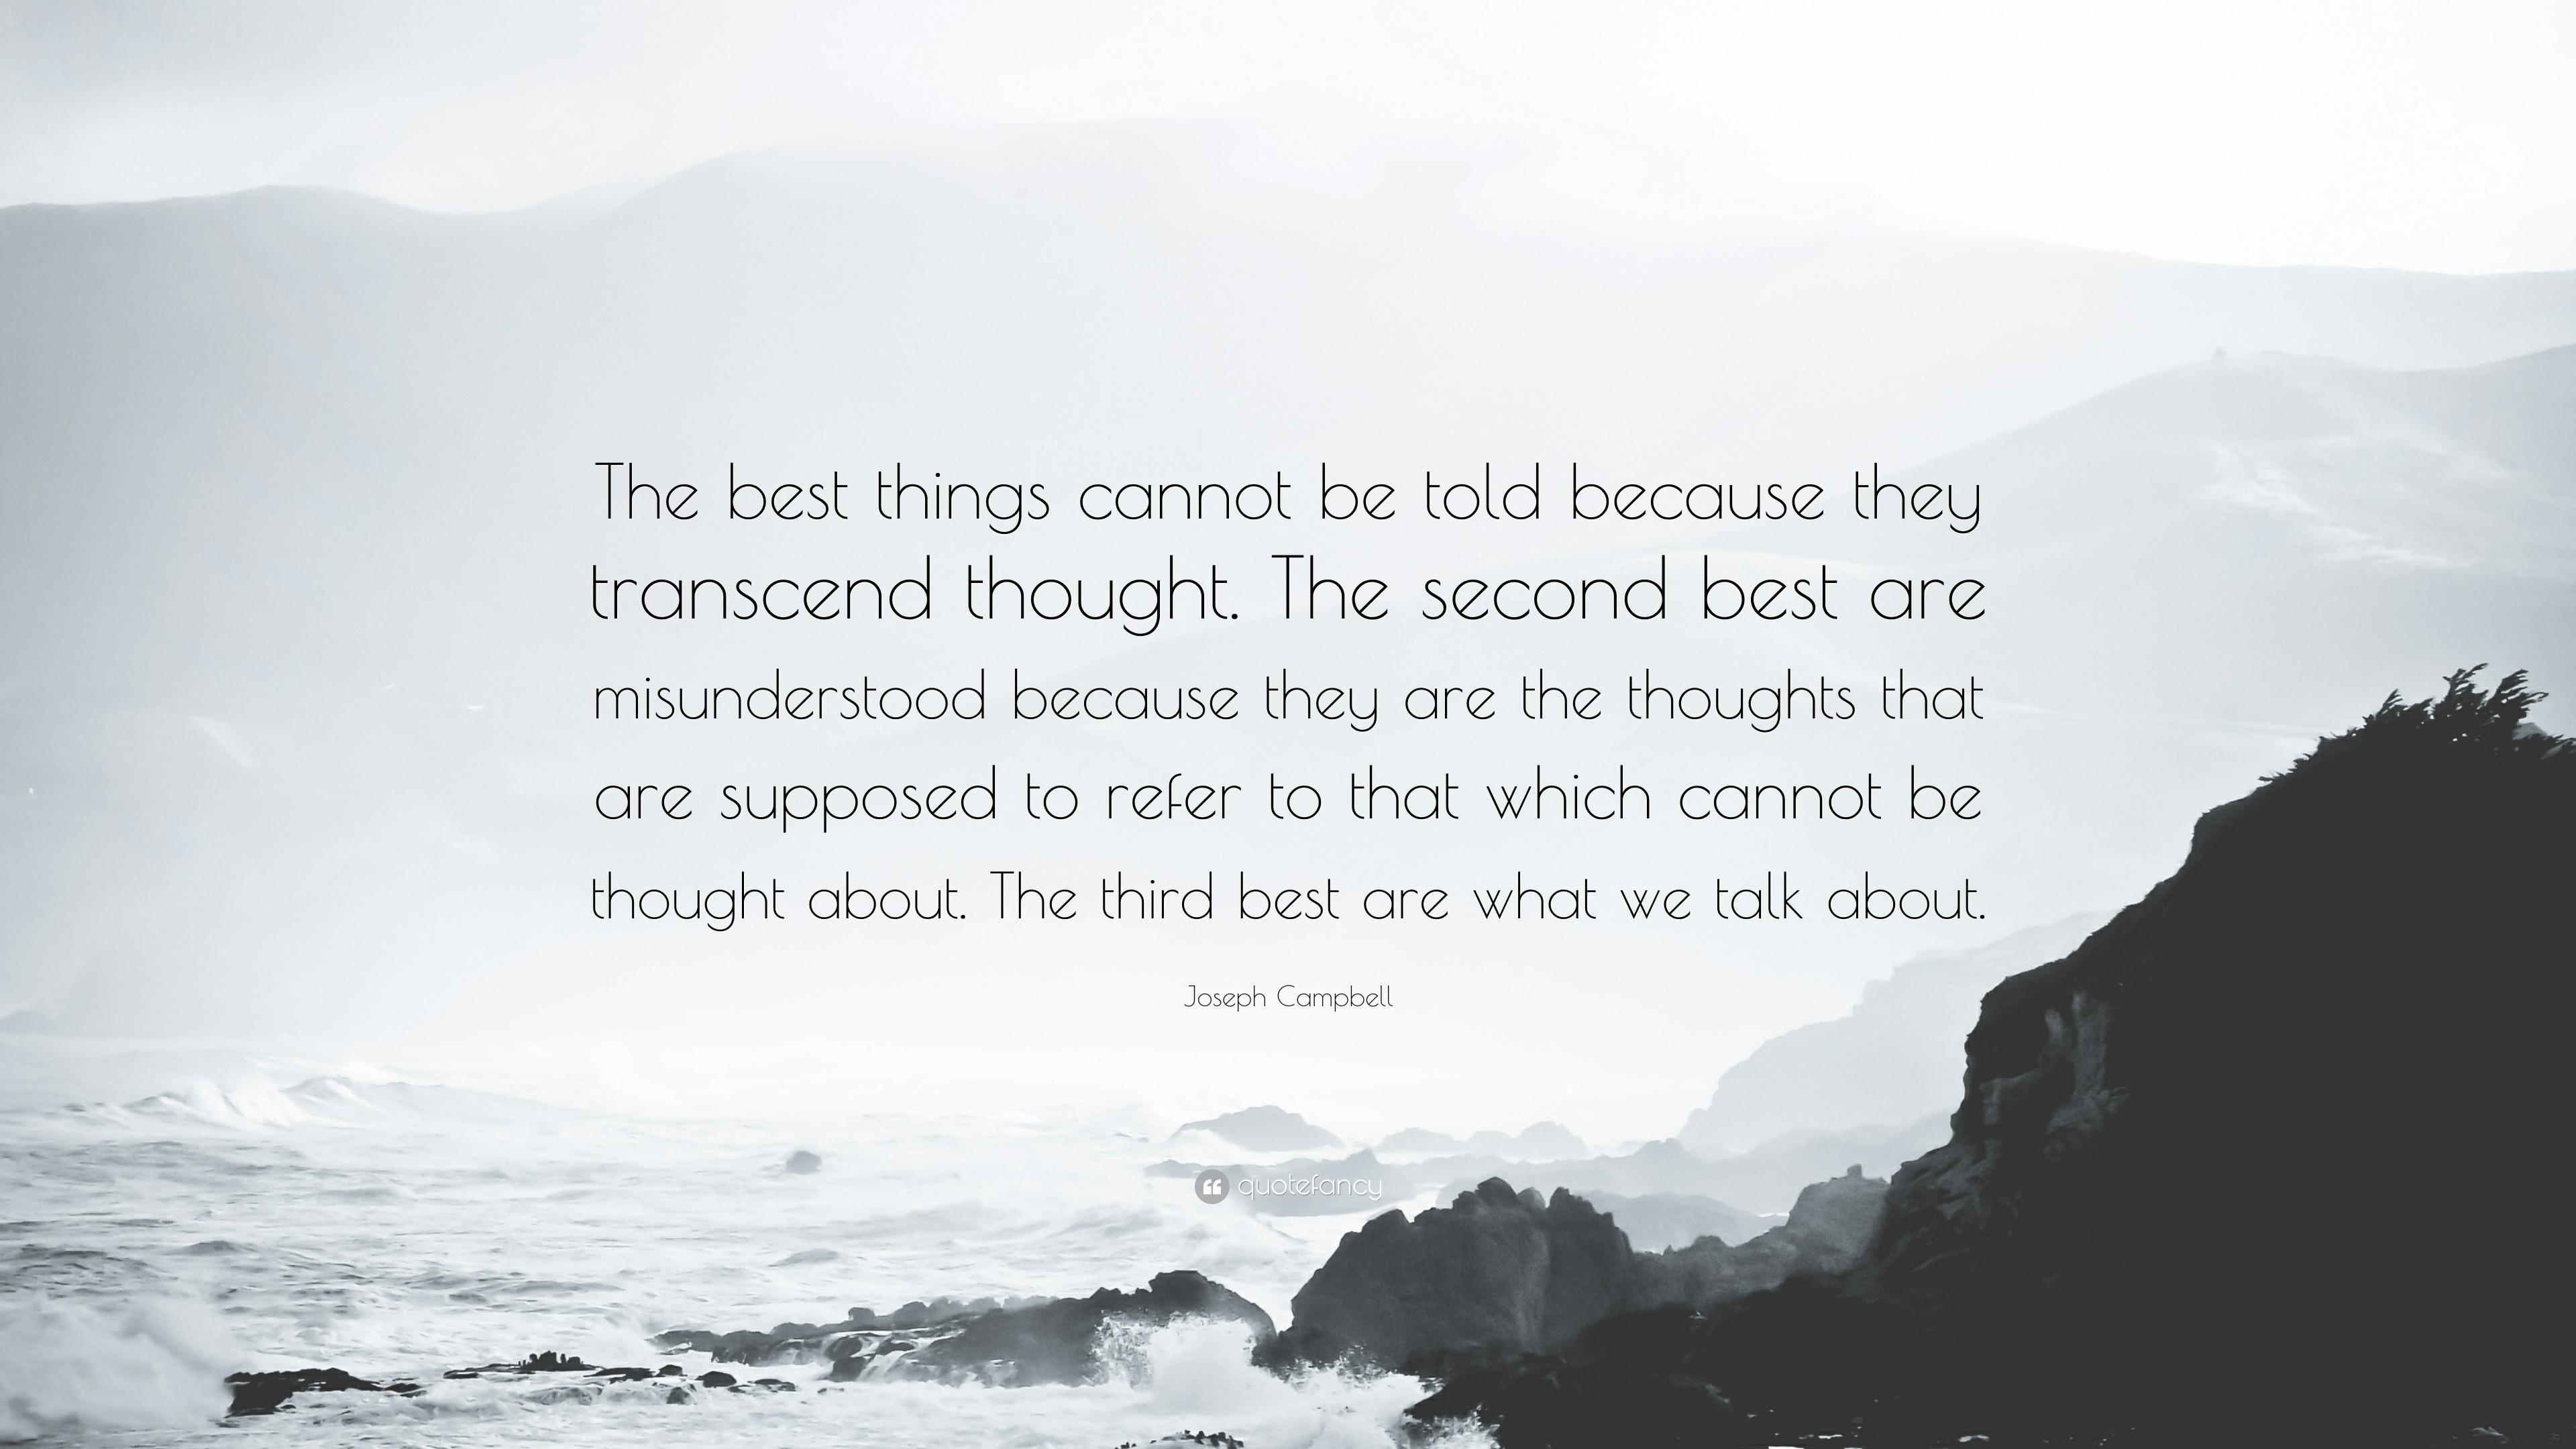 Joseph Campbell Quote: “The best things cannot be told because they  transcend thought. The second best are misunderstood because they are the  th”